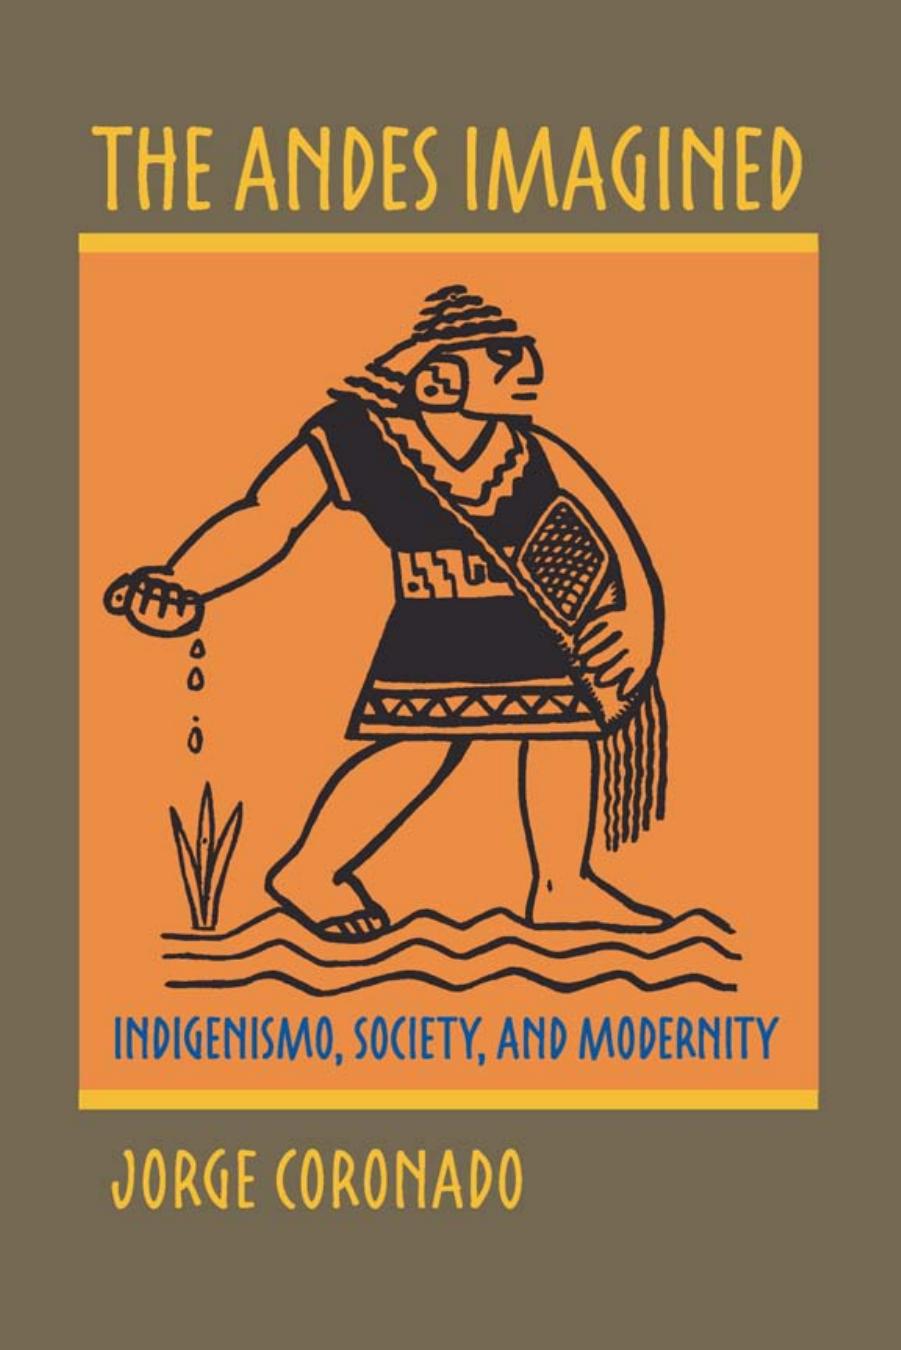 The Andes Imagined : Indigenismo, Society, and Modernity by Jorge Coronado